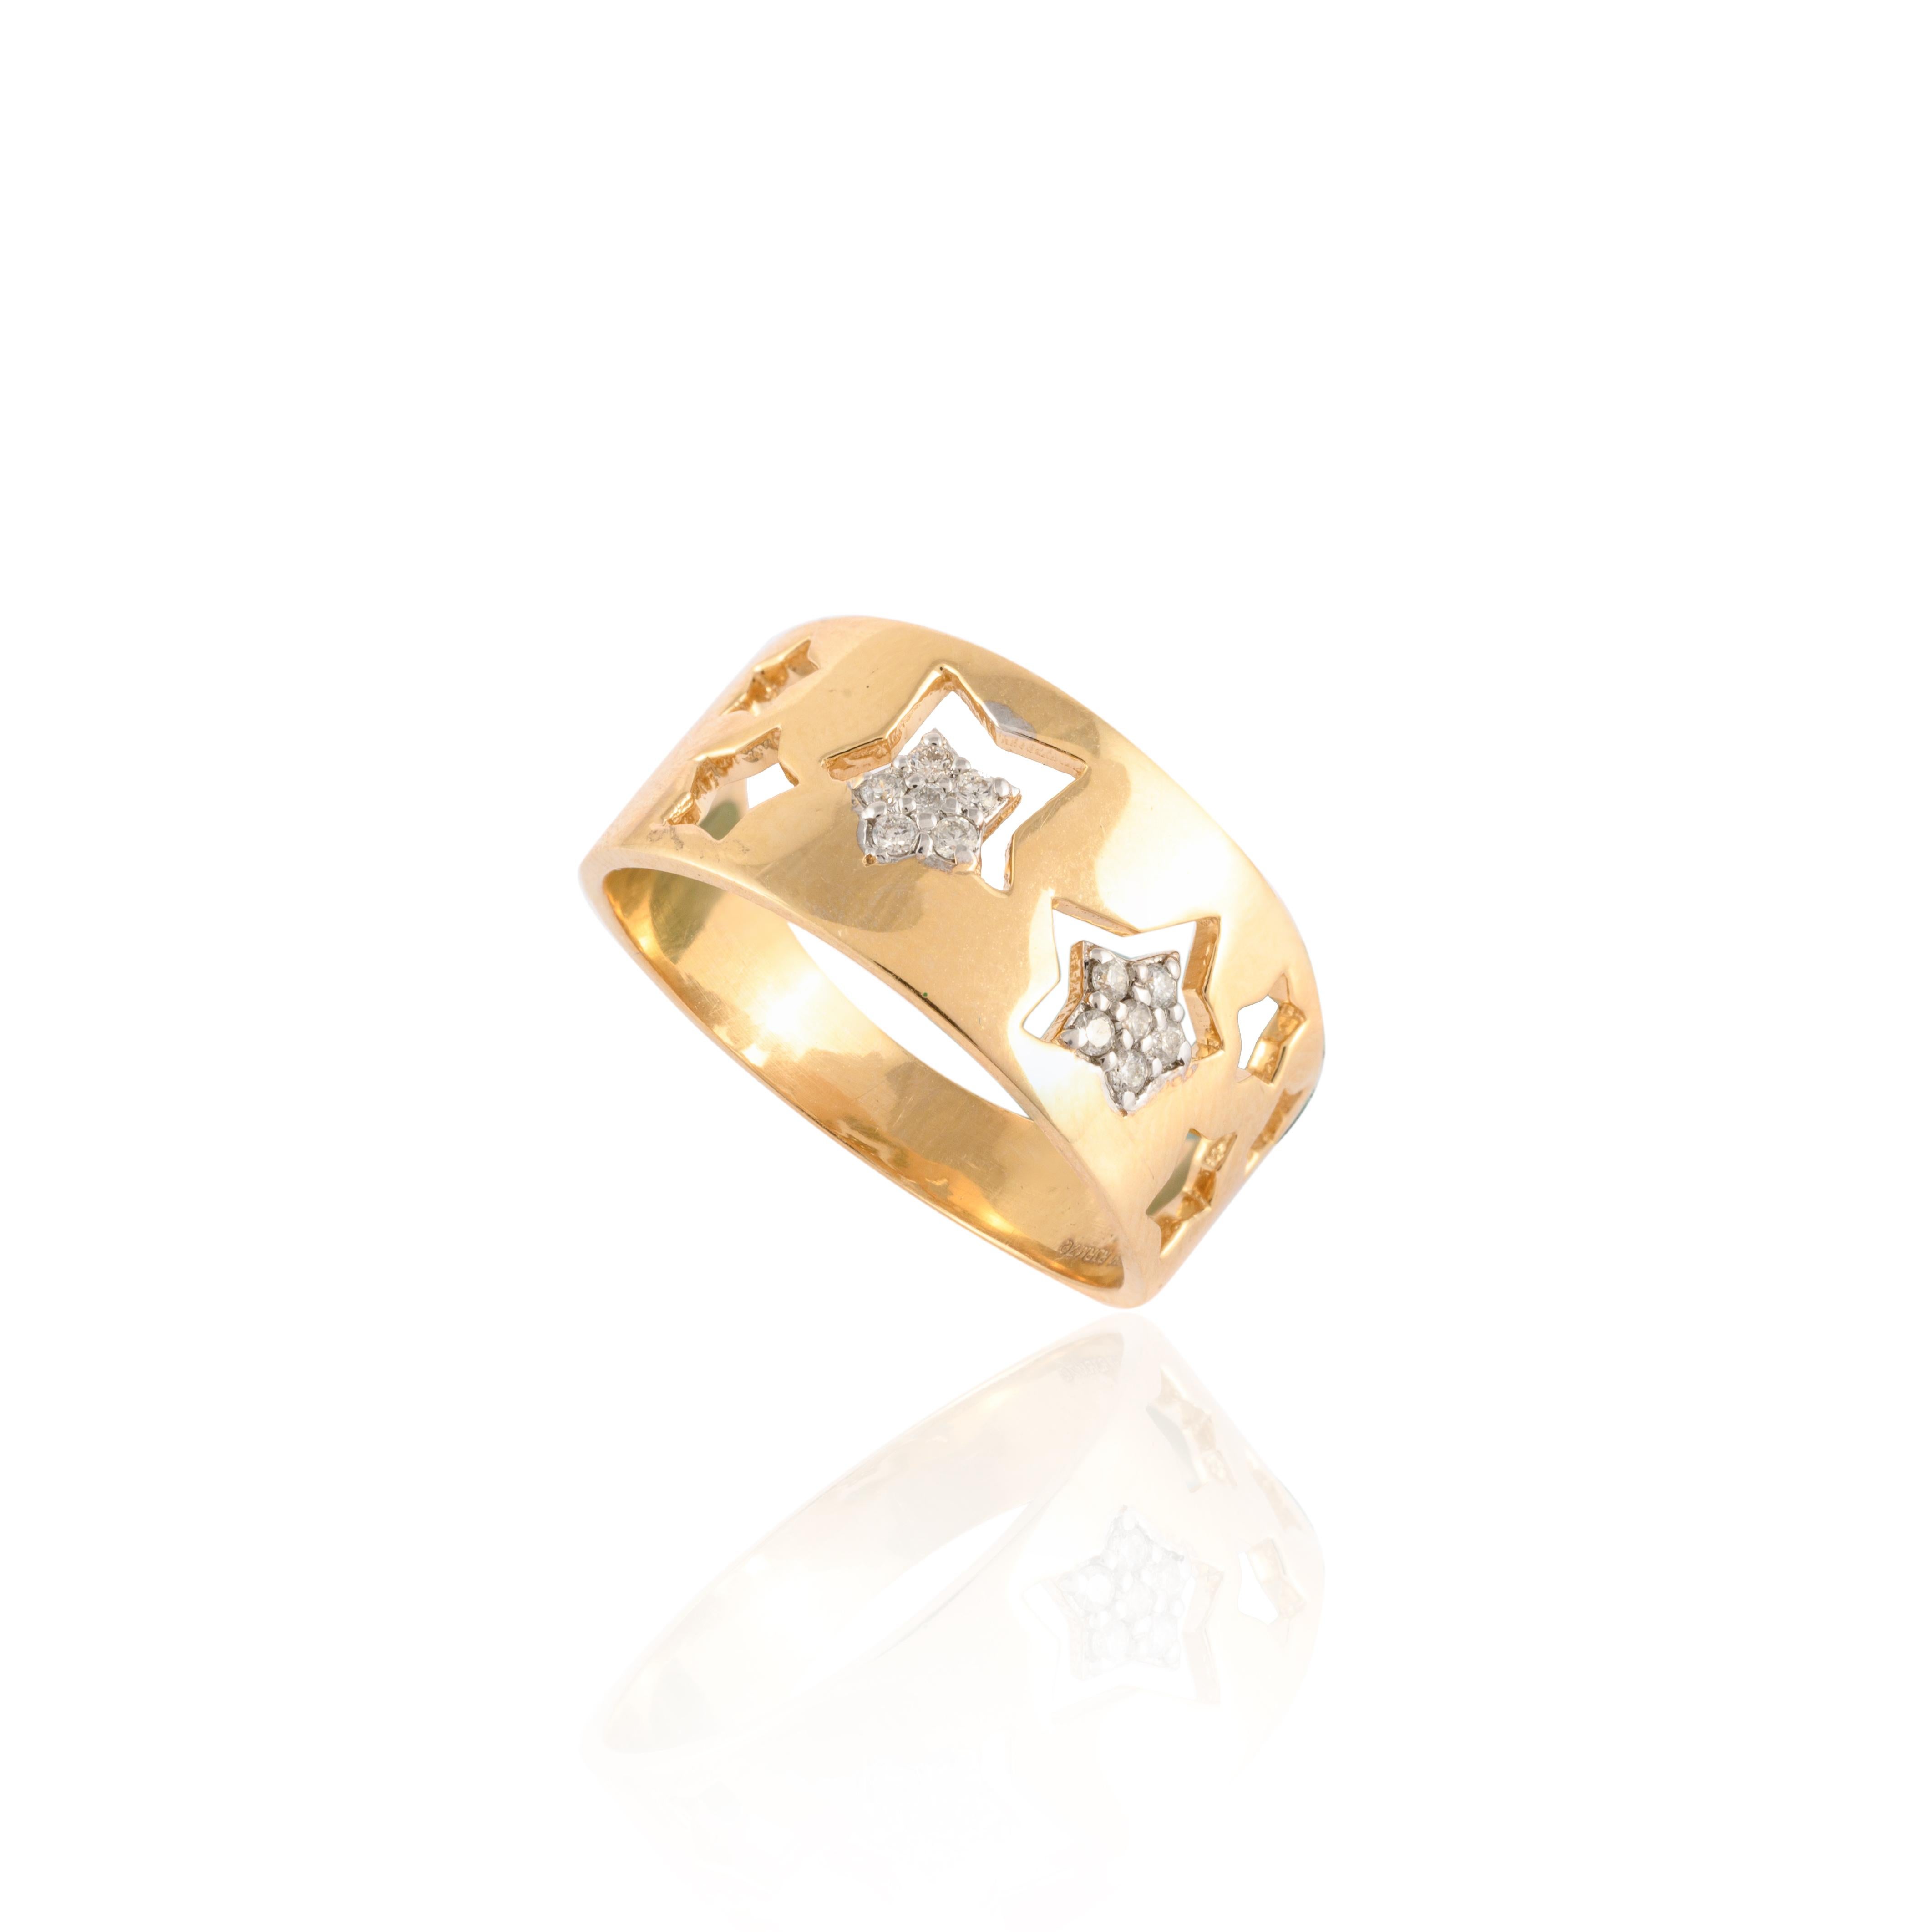 For Sale:  Star Cutout Genuine Diamond Band Ring 18 Karat Solid Yellow Gold Fine Jewelry 5